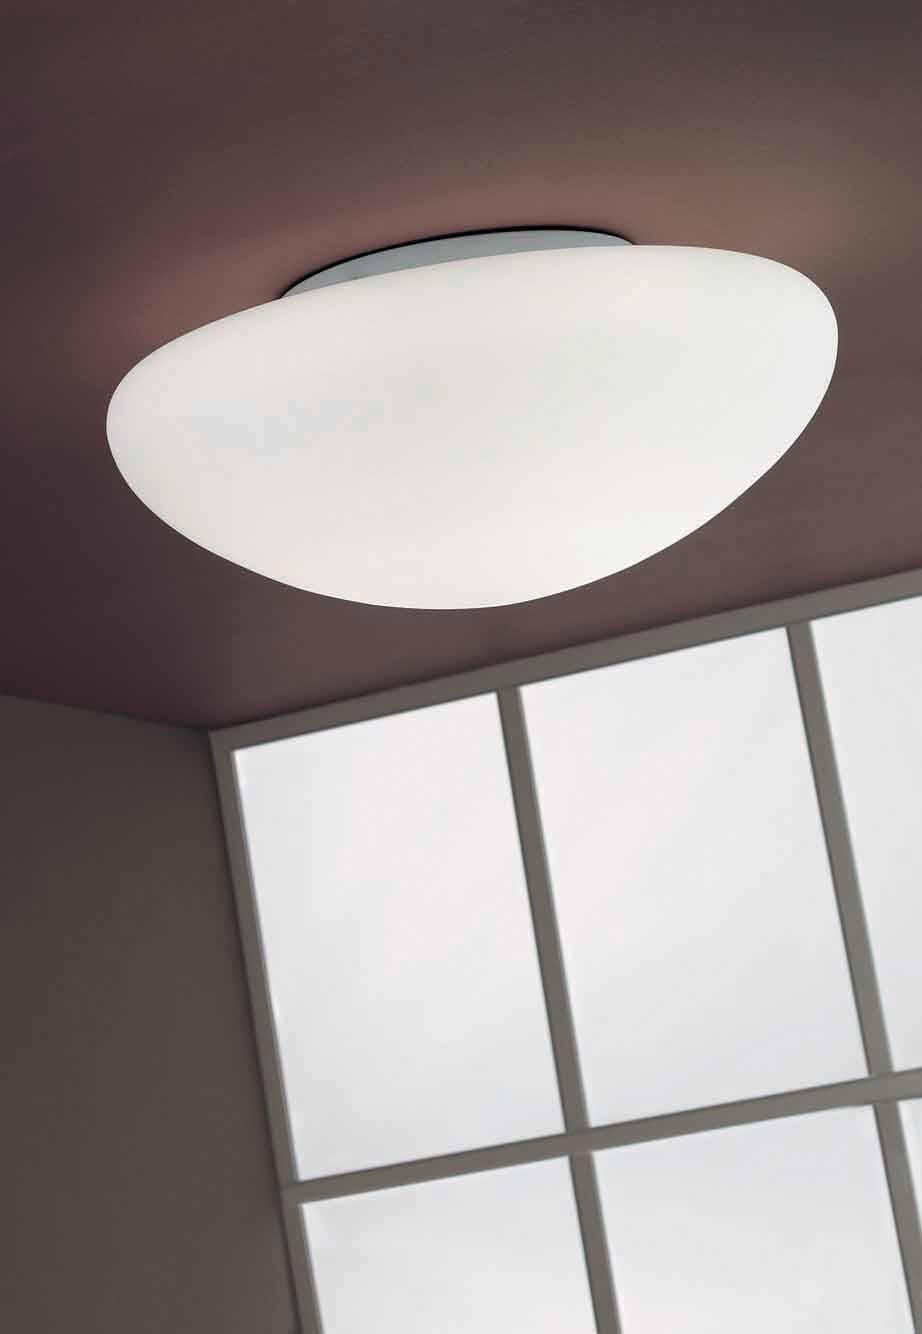 Glass ceiling sconce with round, stone-shaped satin white surface. Metal parts in satin nickel finish. E26 lighting.